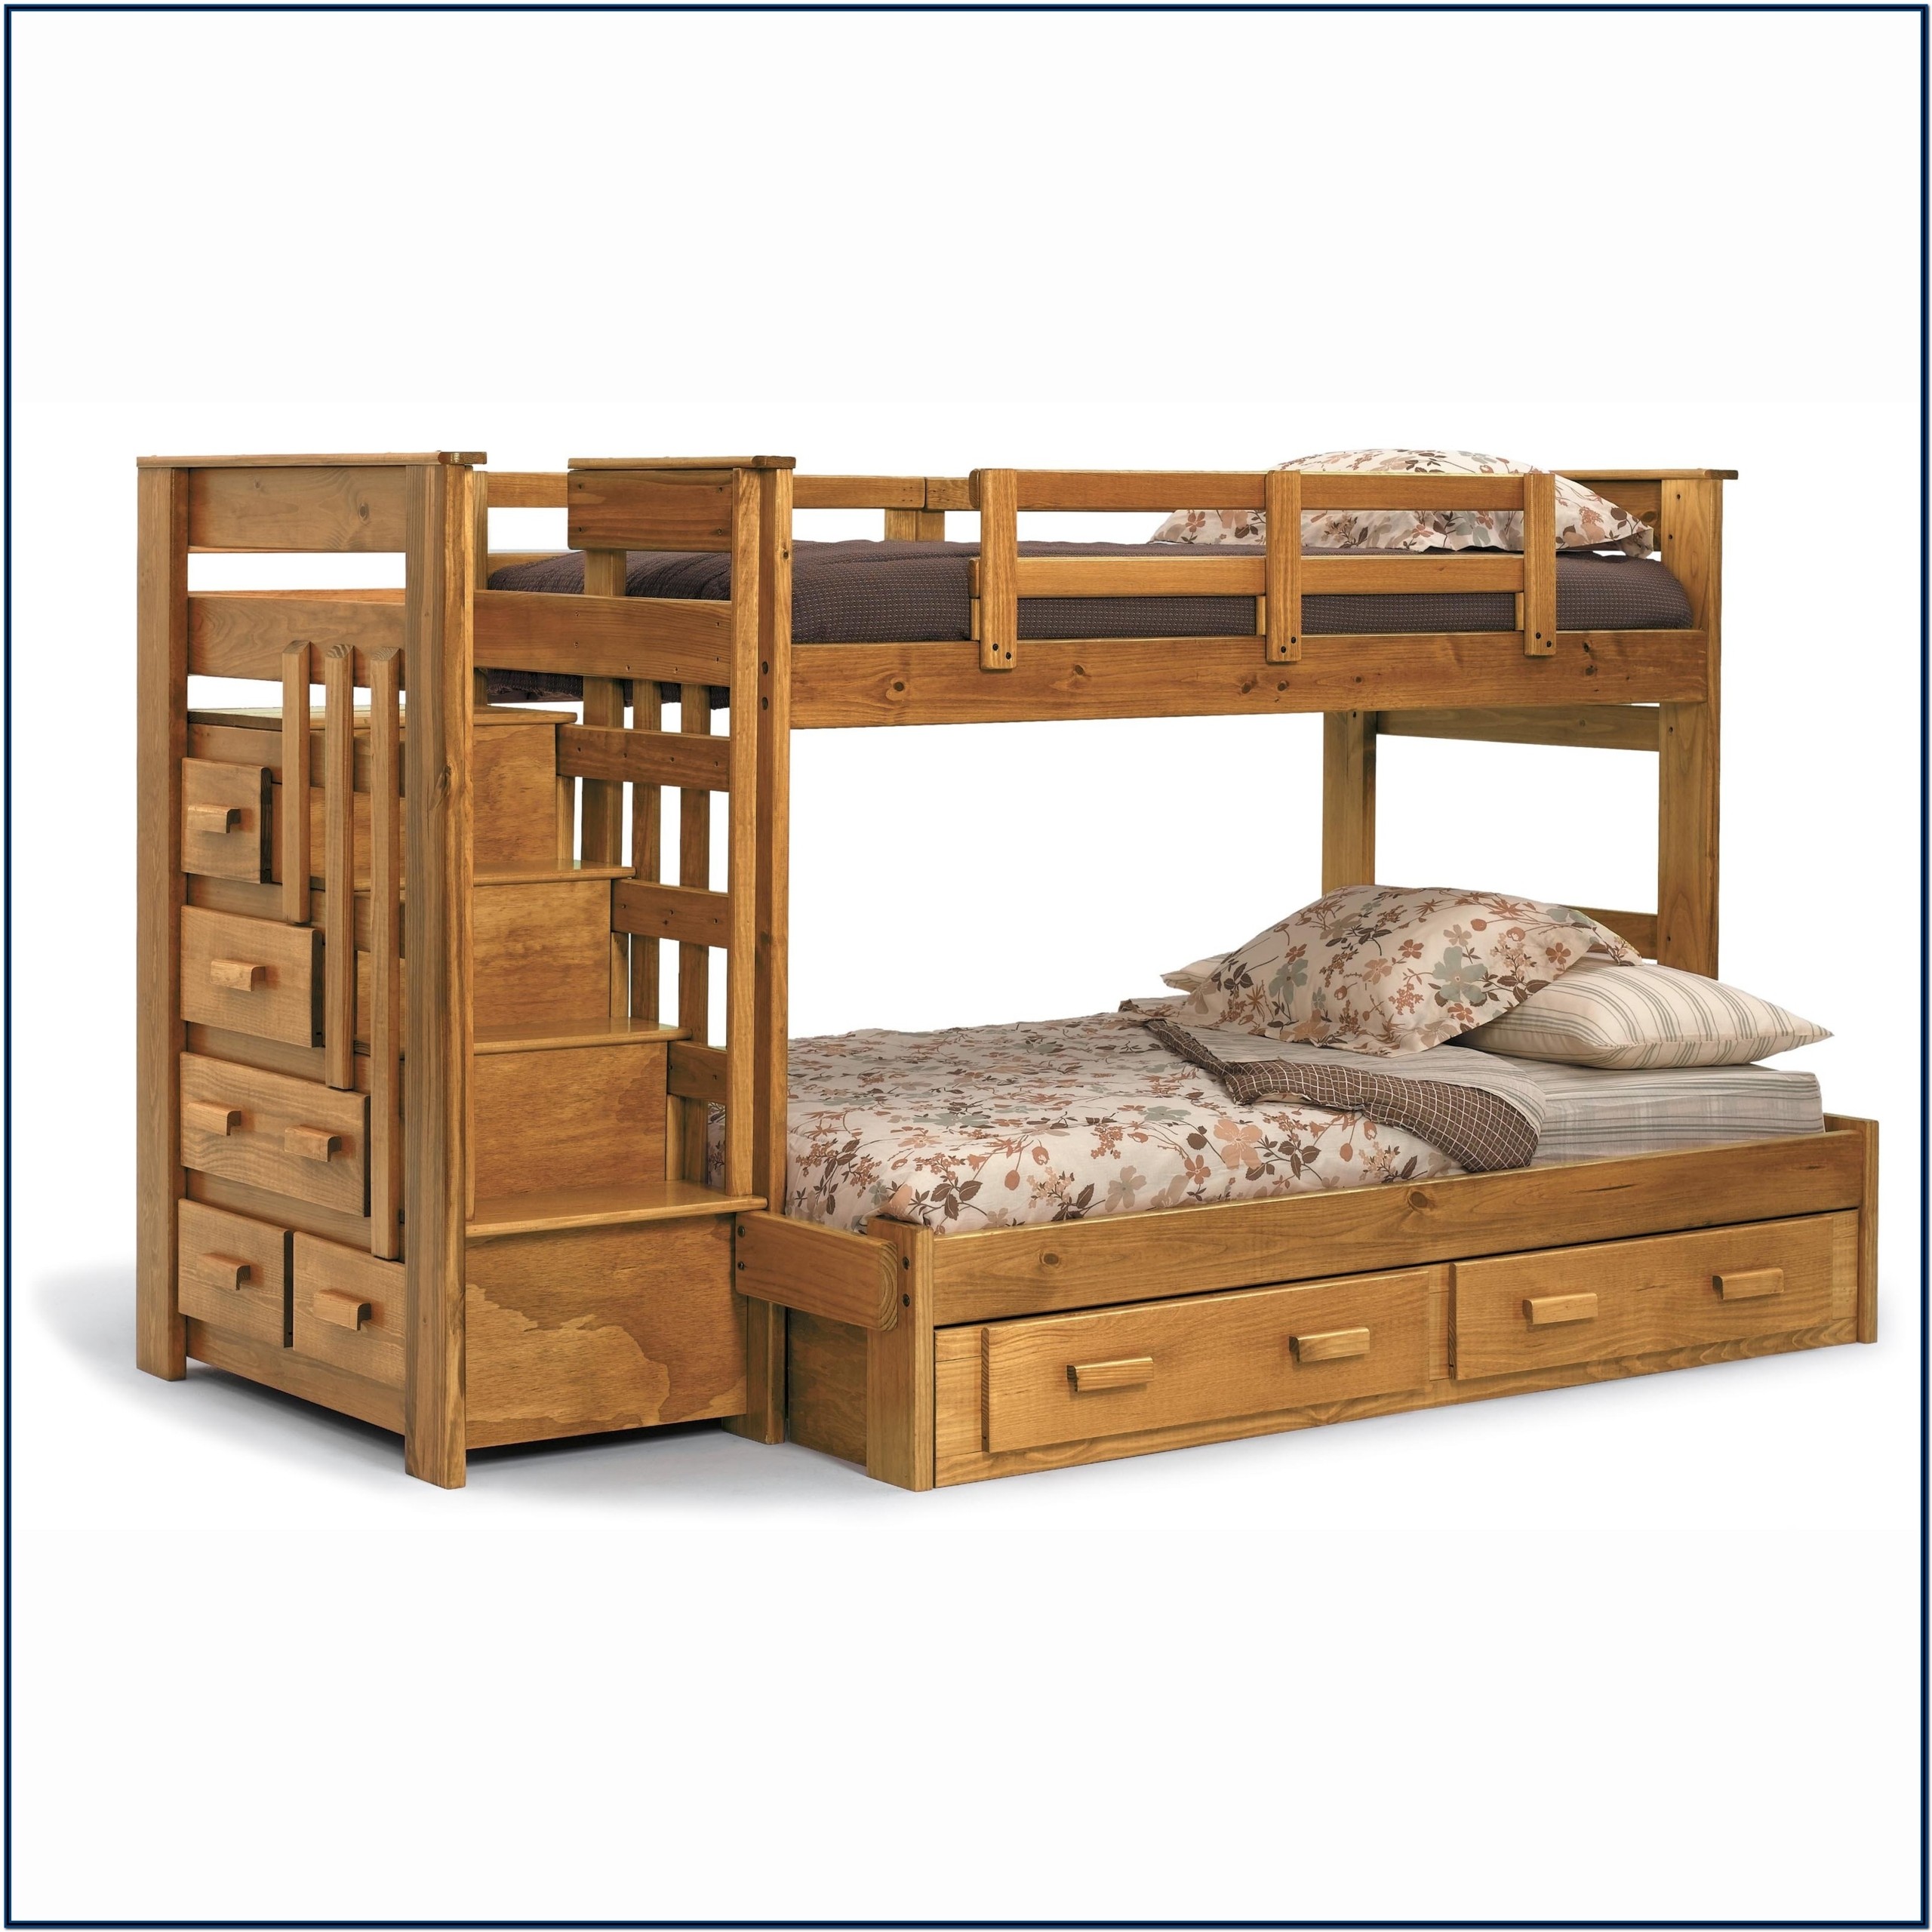 Full size kid bed